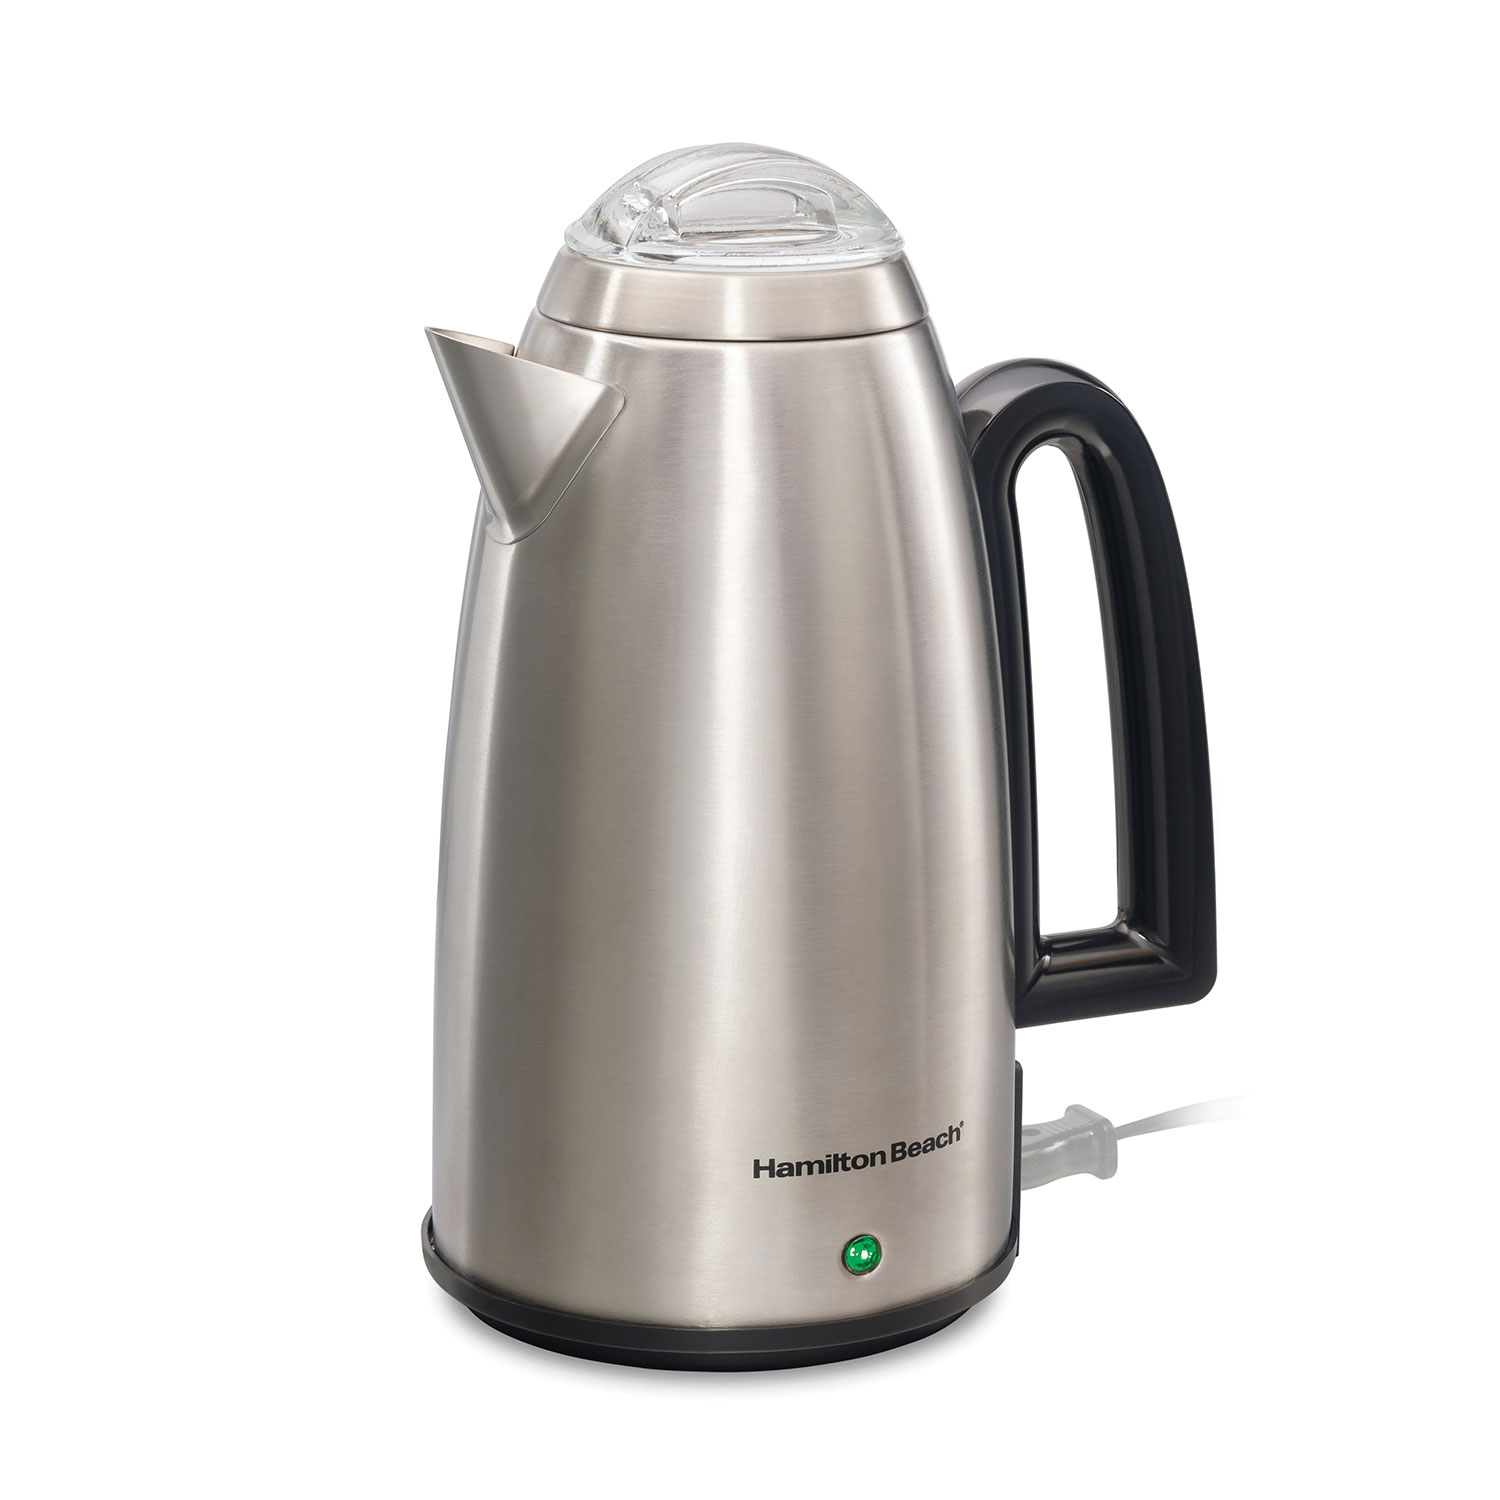 Stainless Steel 12 Cup Coffee Percolator (40614RN)